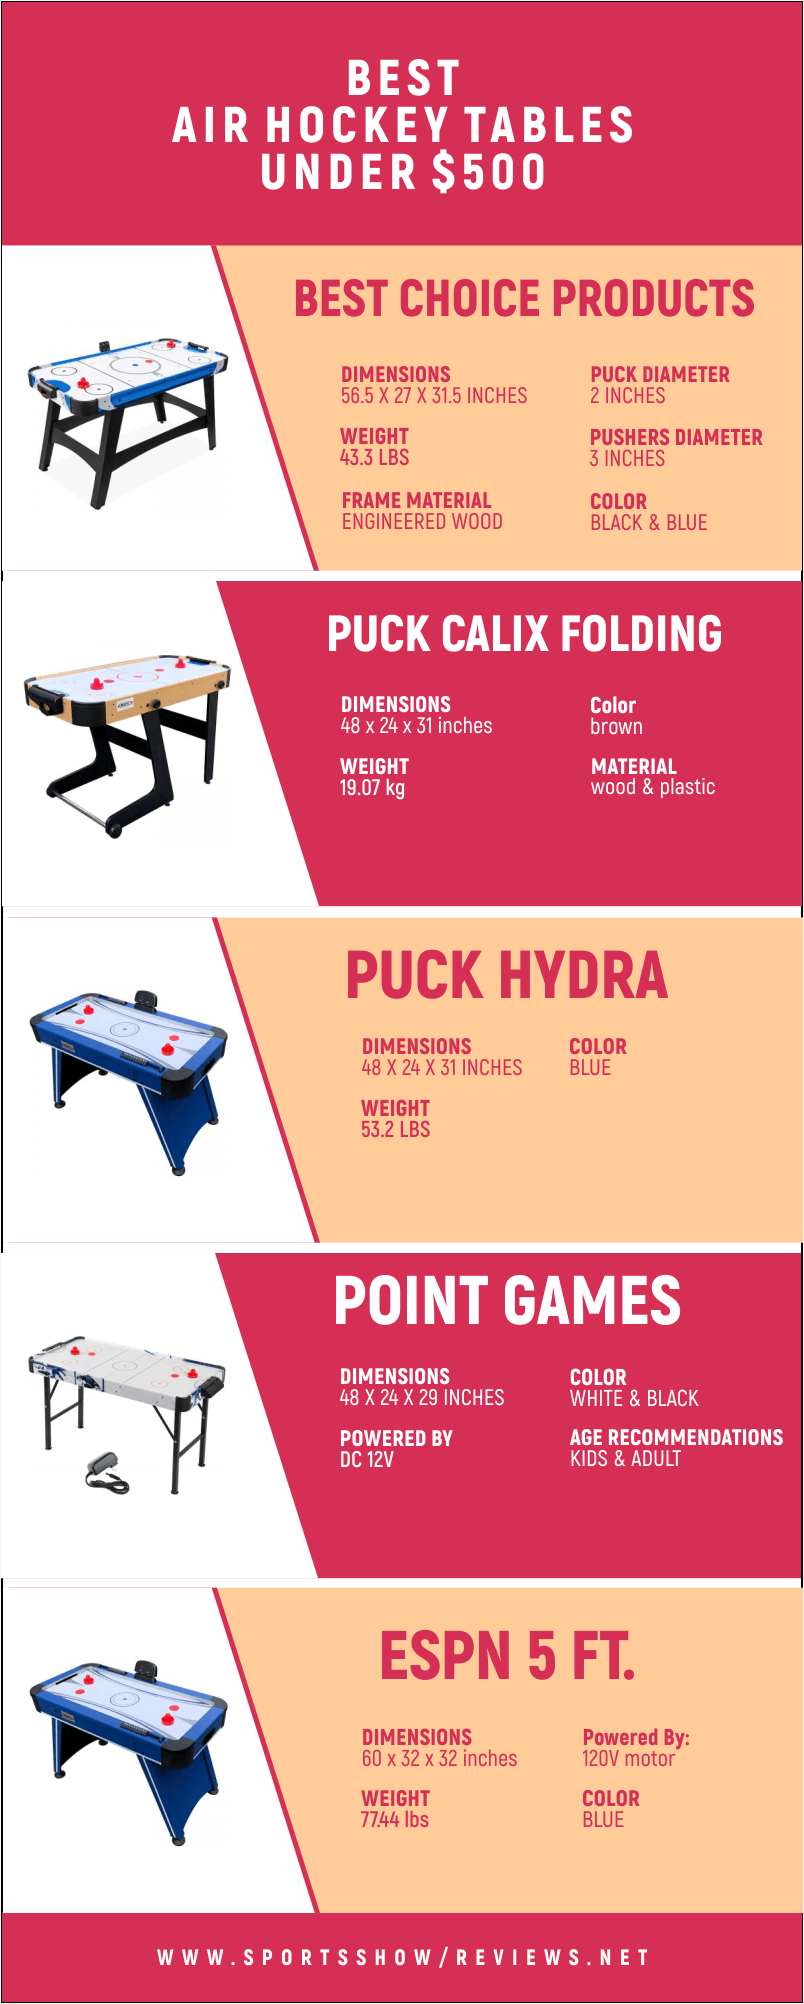 Best Air Hockey Tables Under $500 - Infographic